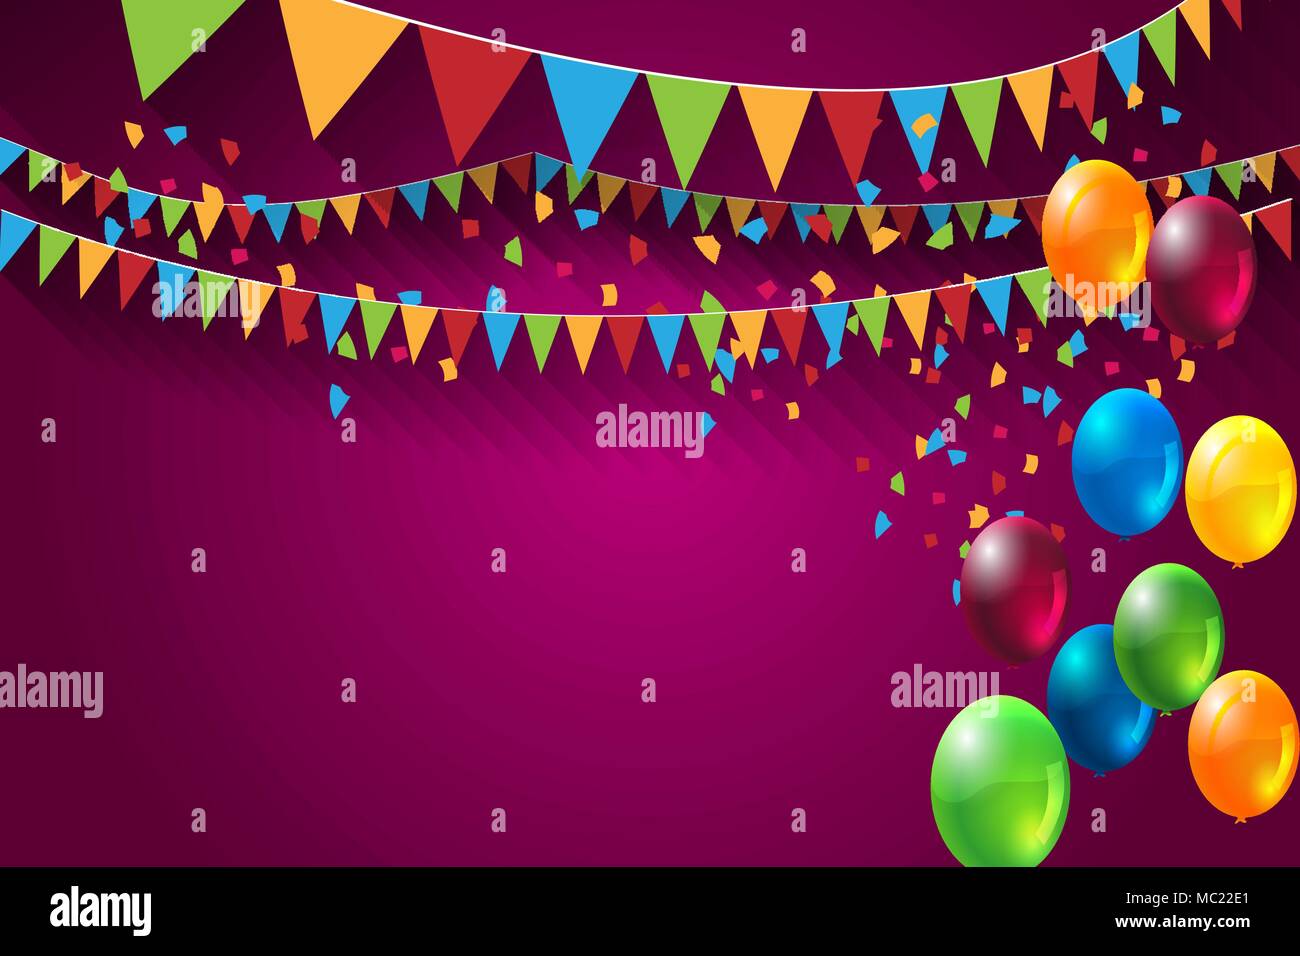 abstract celebration birthday background with colorful balloons ...